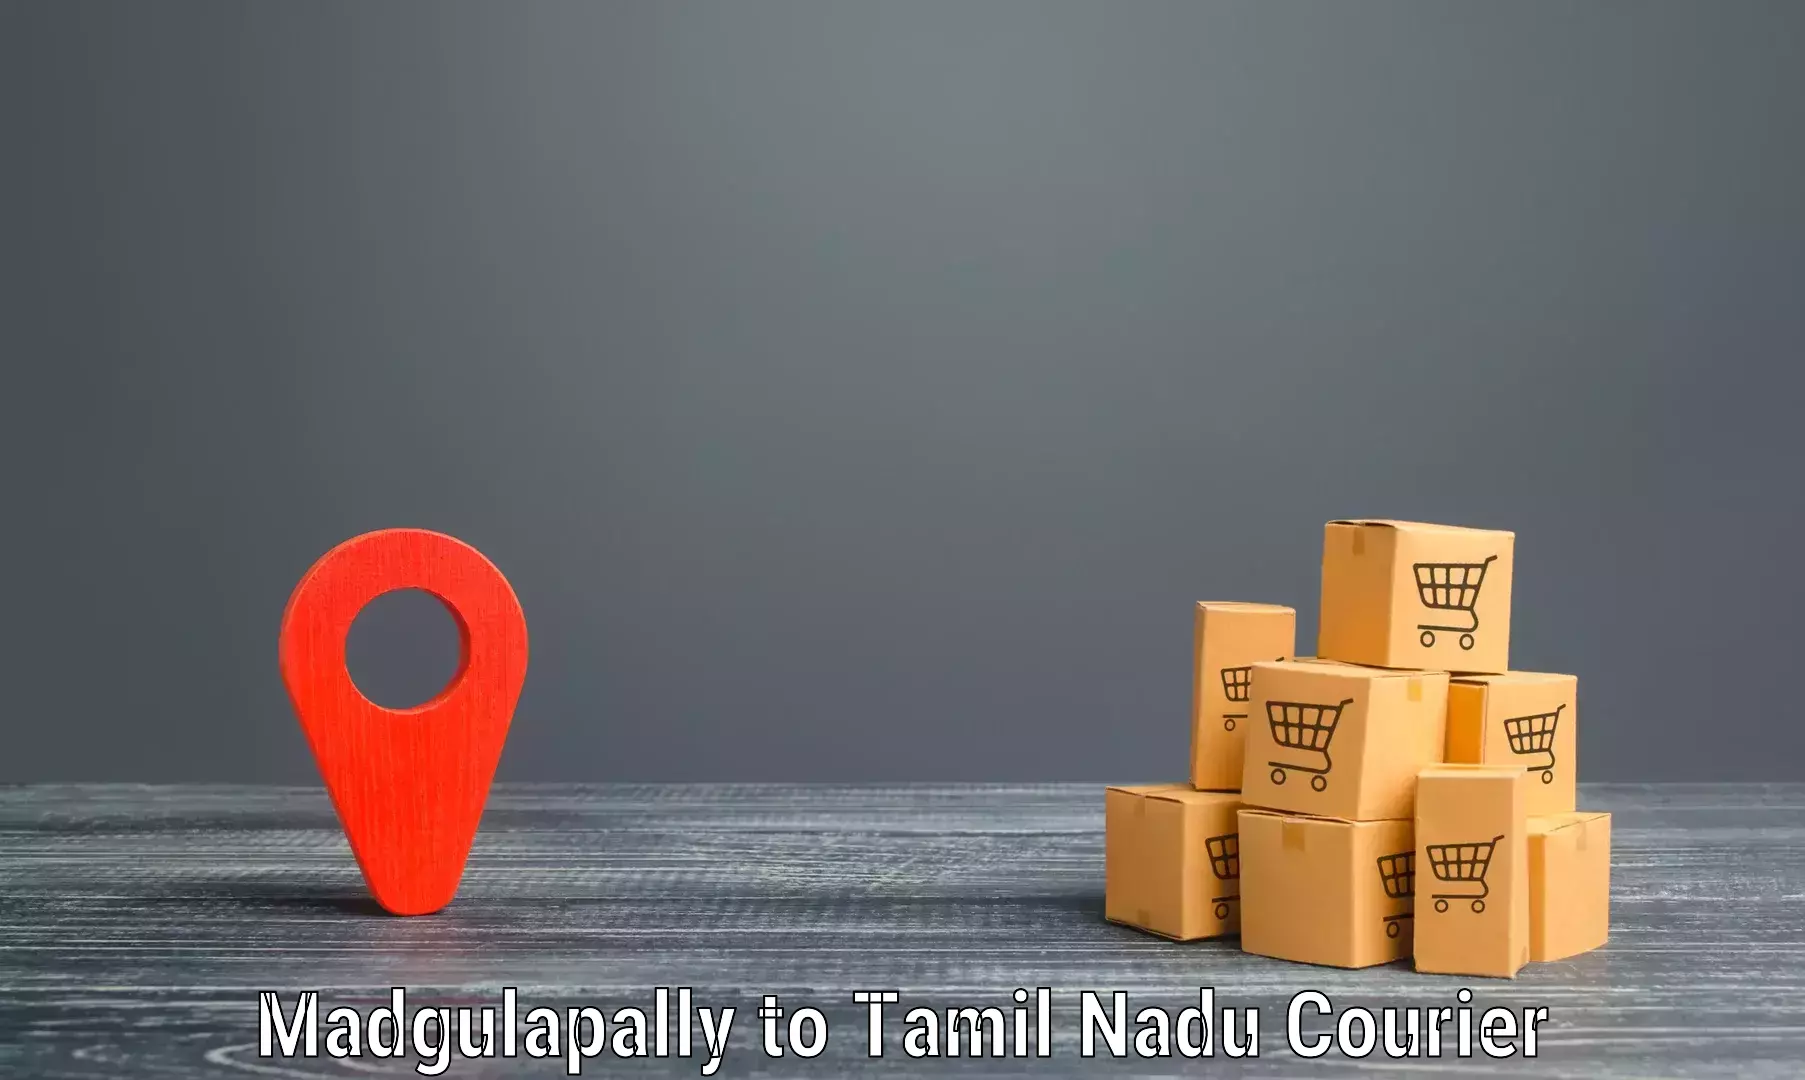 Reliable freight solutions in Madgulapally to Ayyampettai